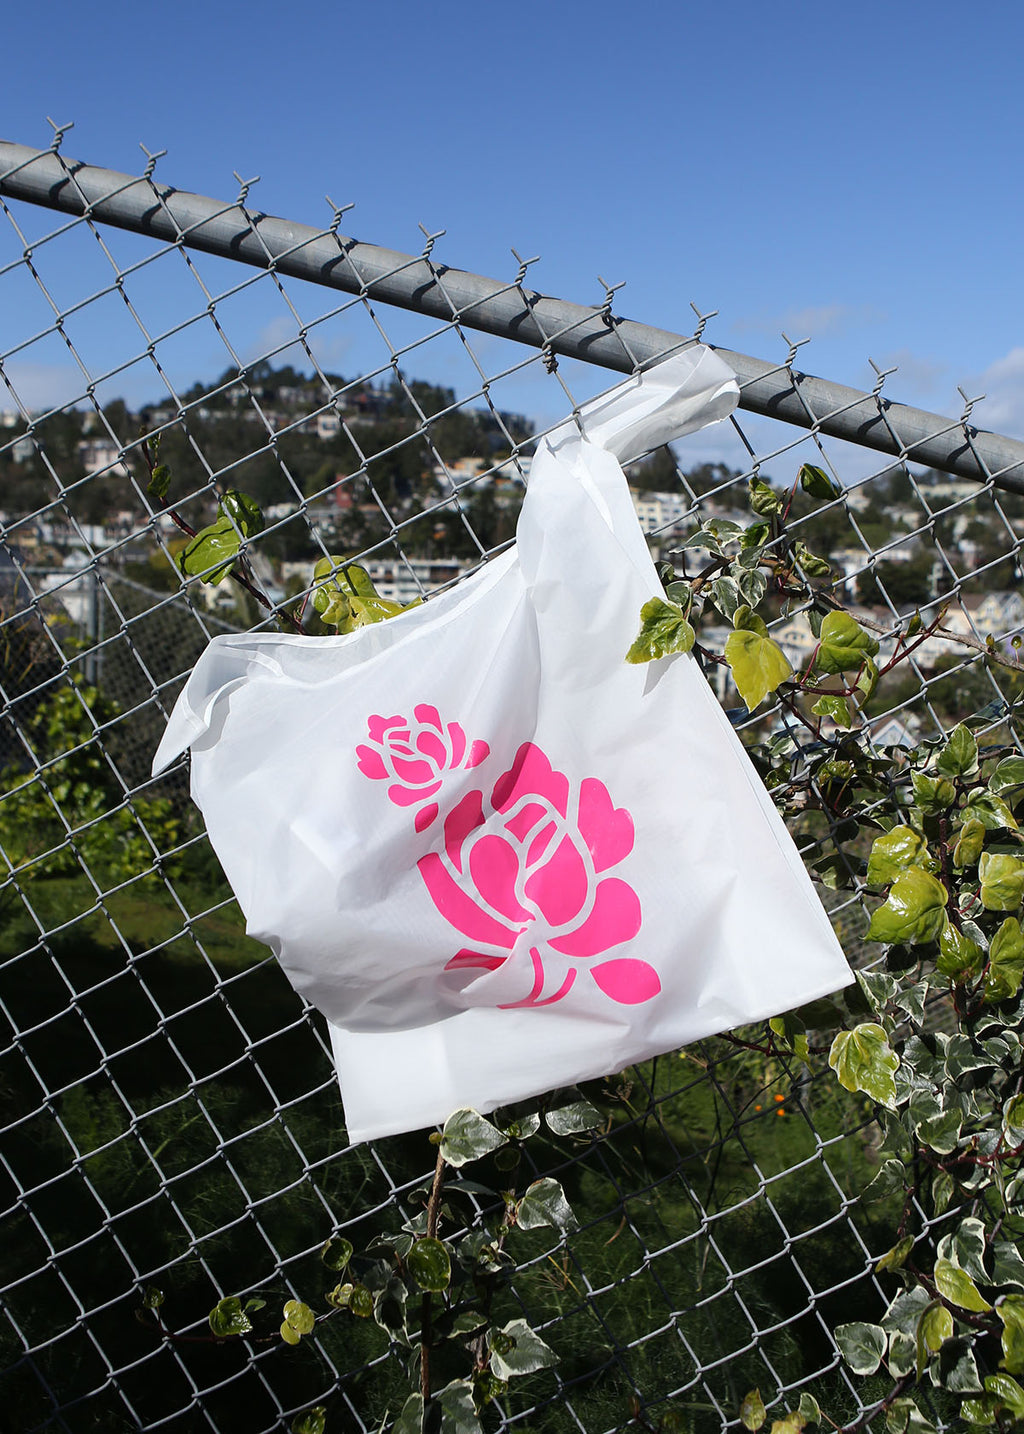 Standard Baggu nylon shopping tote designed by Taiwanese-American artist Fanny Luor. Inspired by grocery bags often found in Taiwan that feature hot pink roses on a white bag.